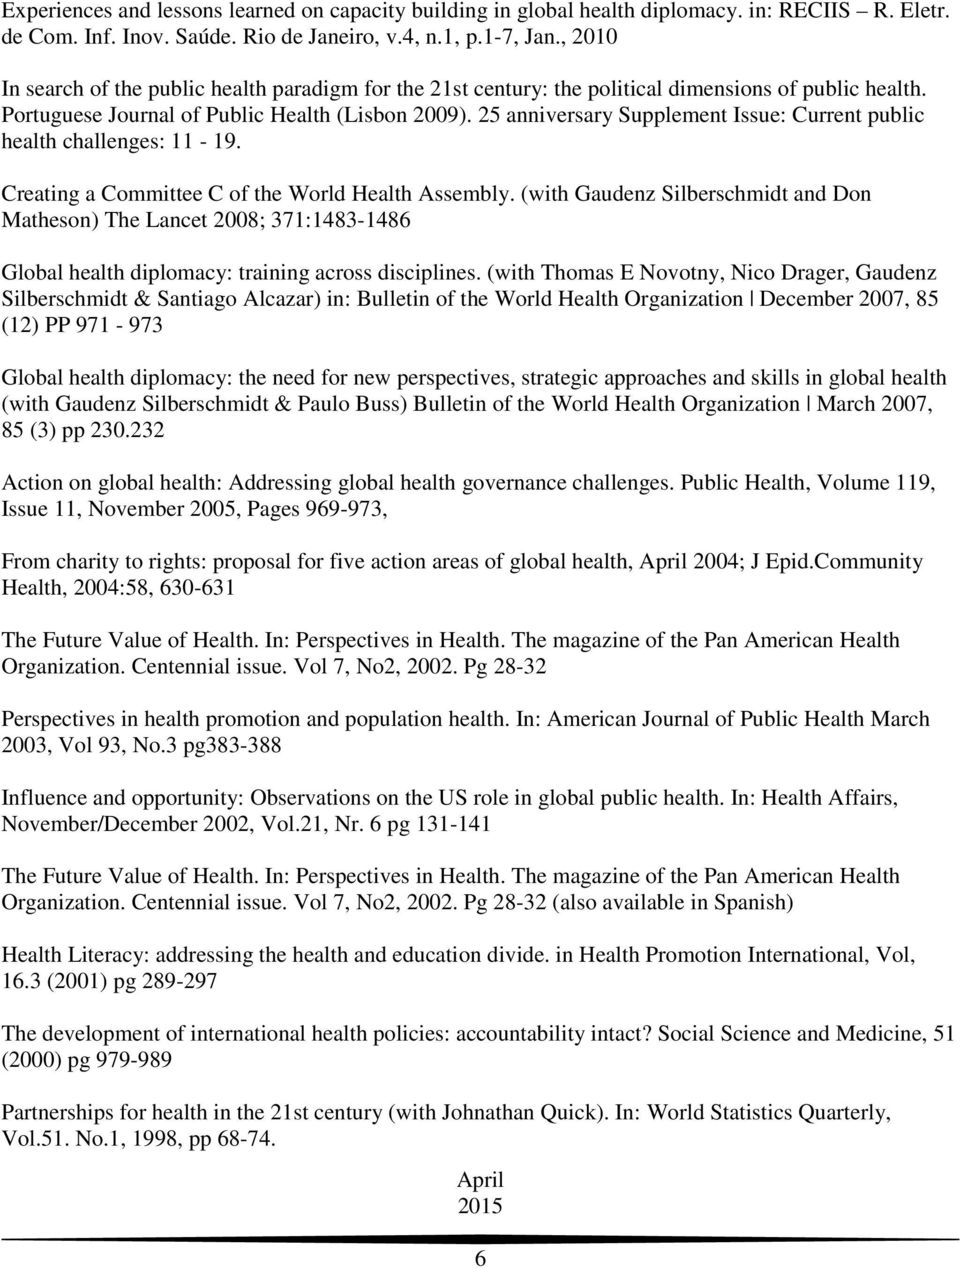 25 anniversary Supplement Issue: Current public health challenges: 11-19. Creating a Committee C of the World Health Assembly.